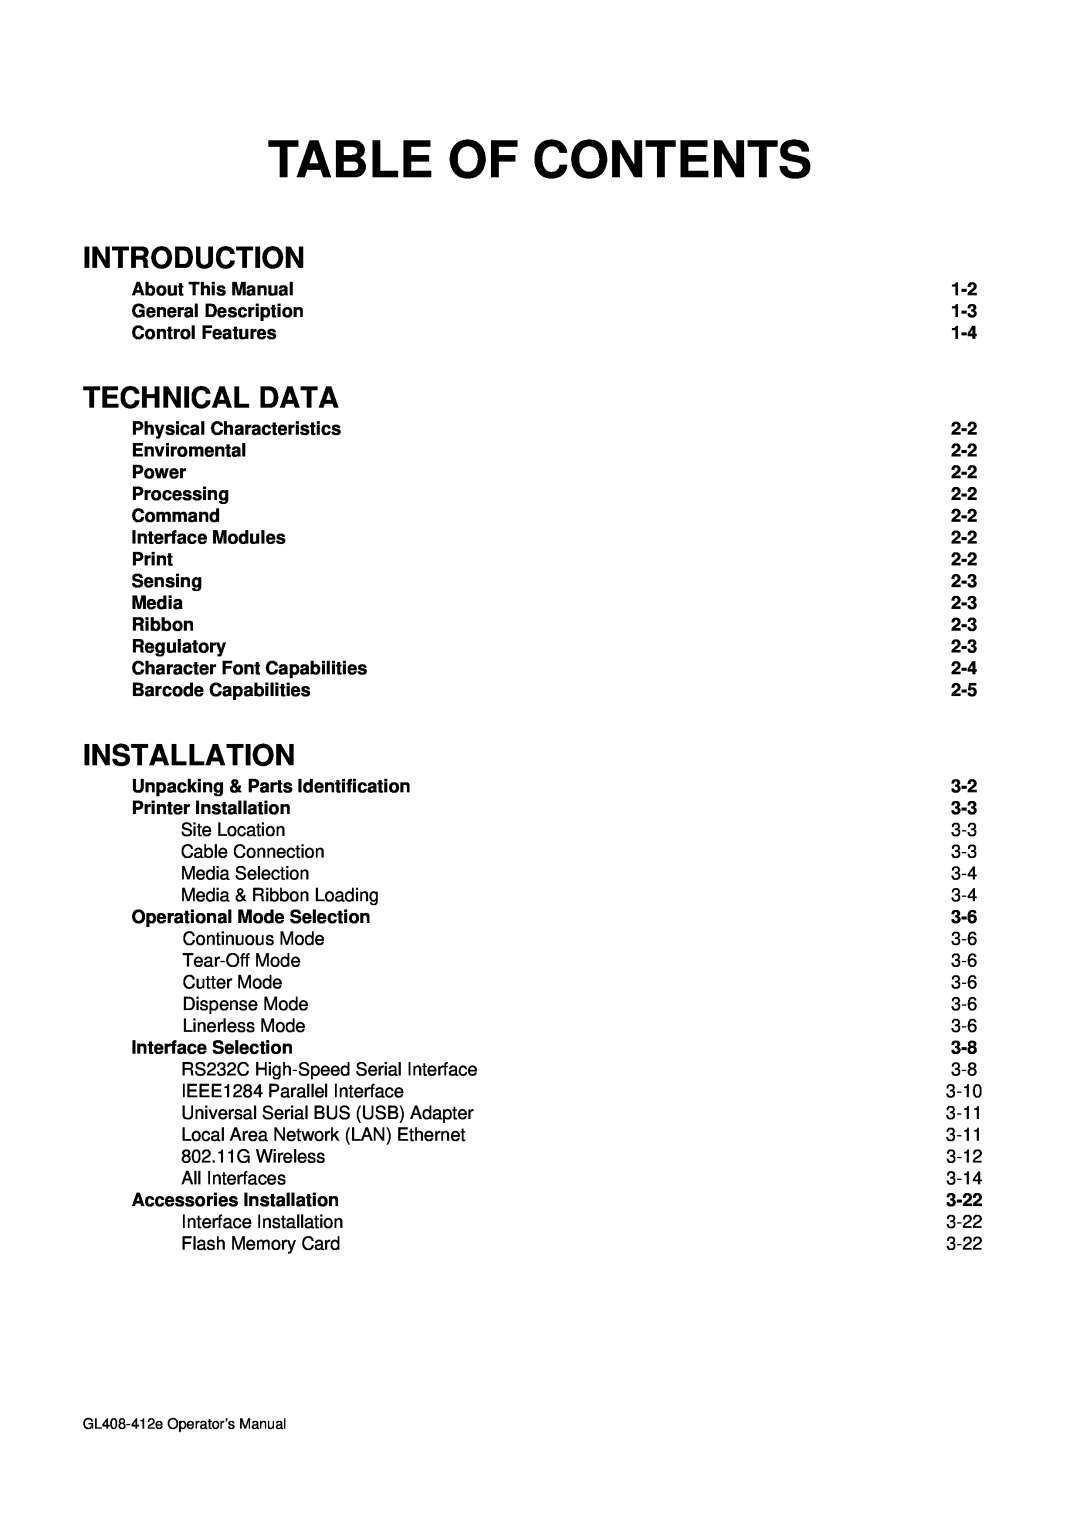 SATO GL4XXE manual Introduction, Technical Data, Installation, Table Of Contents 